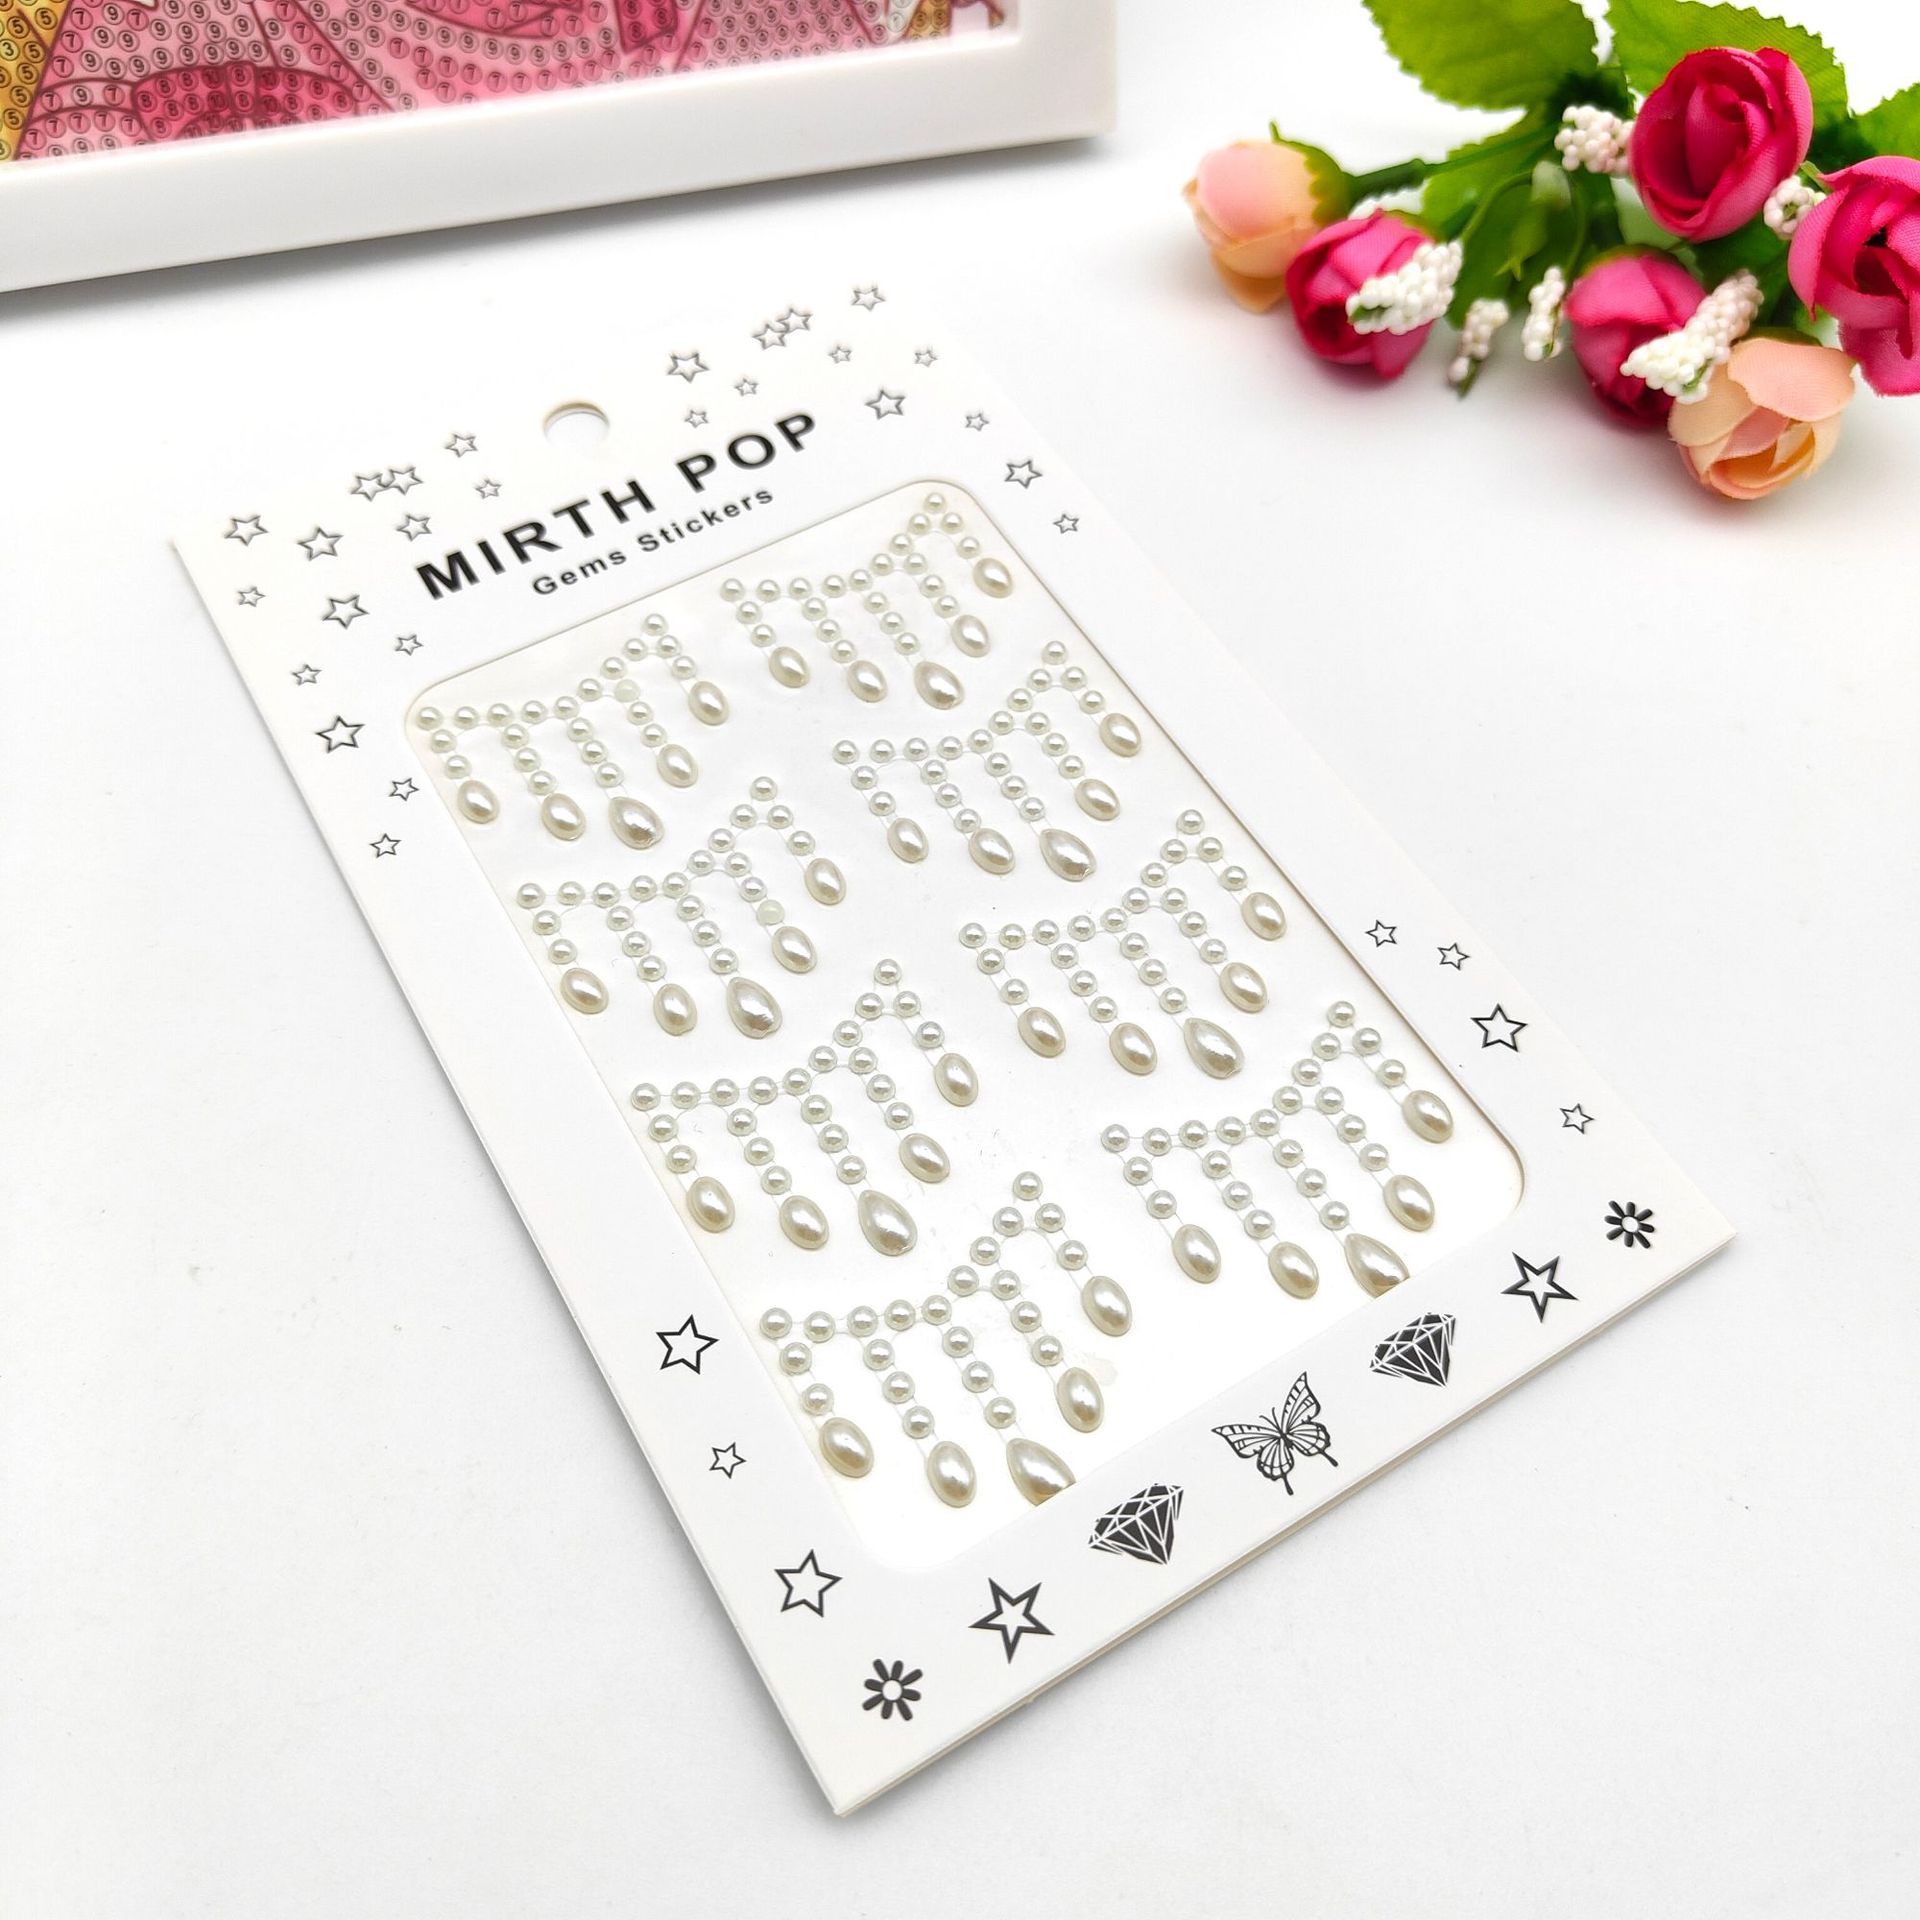 Stick-on Crystals Face Makeup Stickers Face Pearl Ornament Eye Makeup Light Diamond Tear Mole Diamond Rhinestones Paster Face Stage Makeup Makeup Stickers